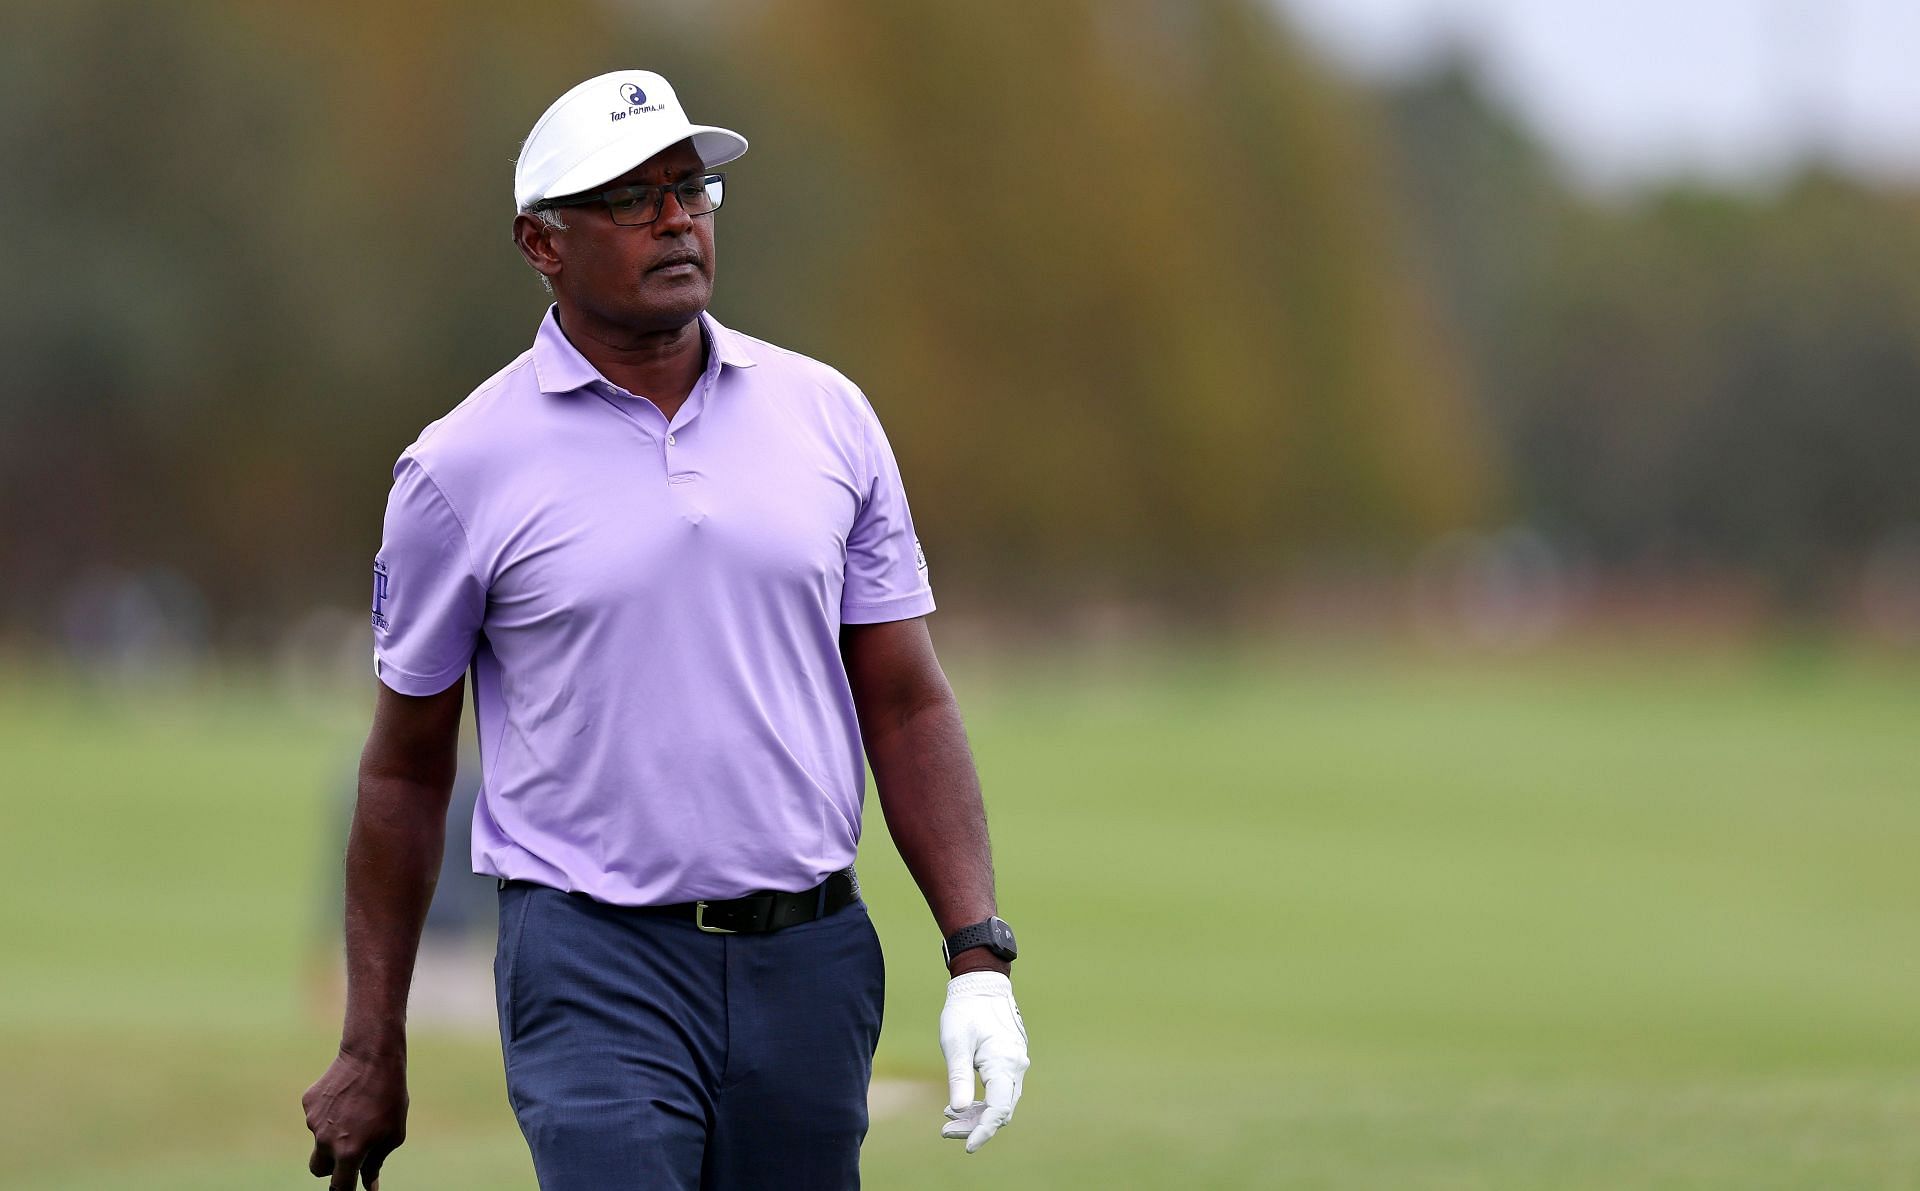 Vijay Singh at the PNC Championship - Round One (Image via Mike Ehrmann/Getty Image)